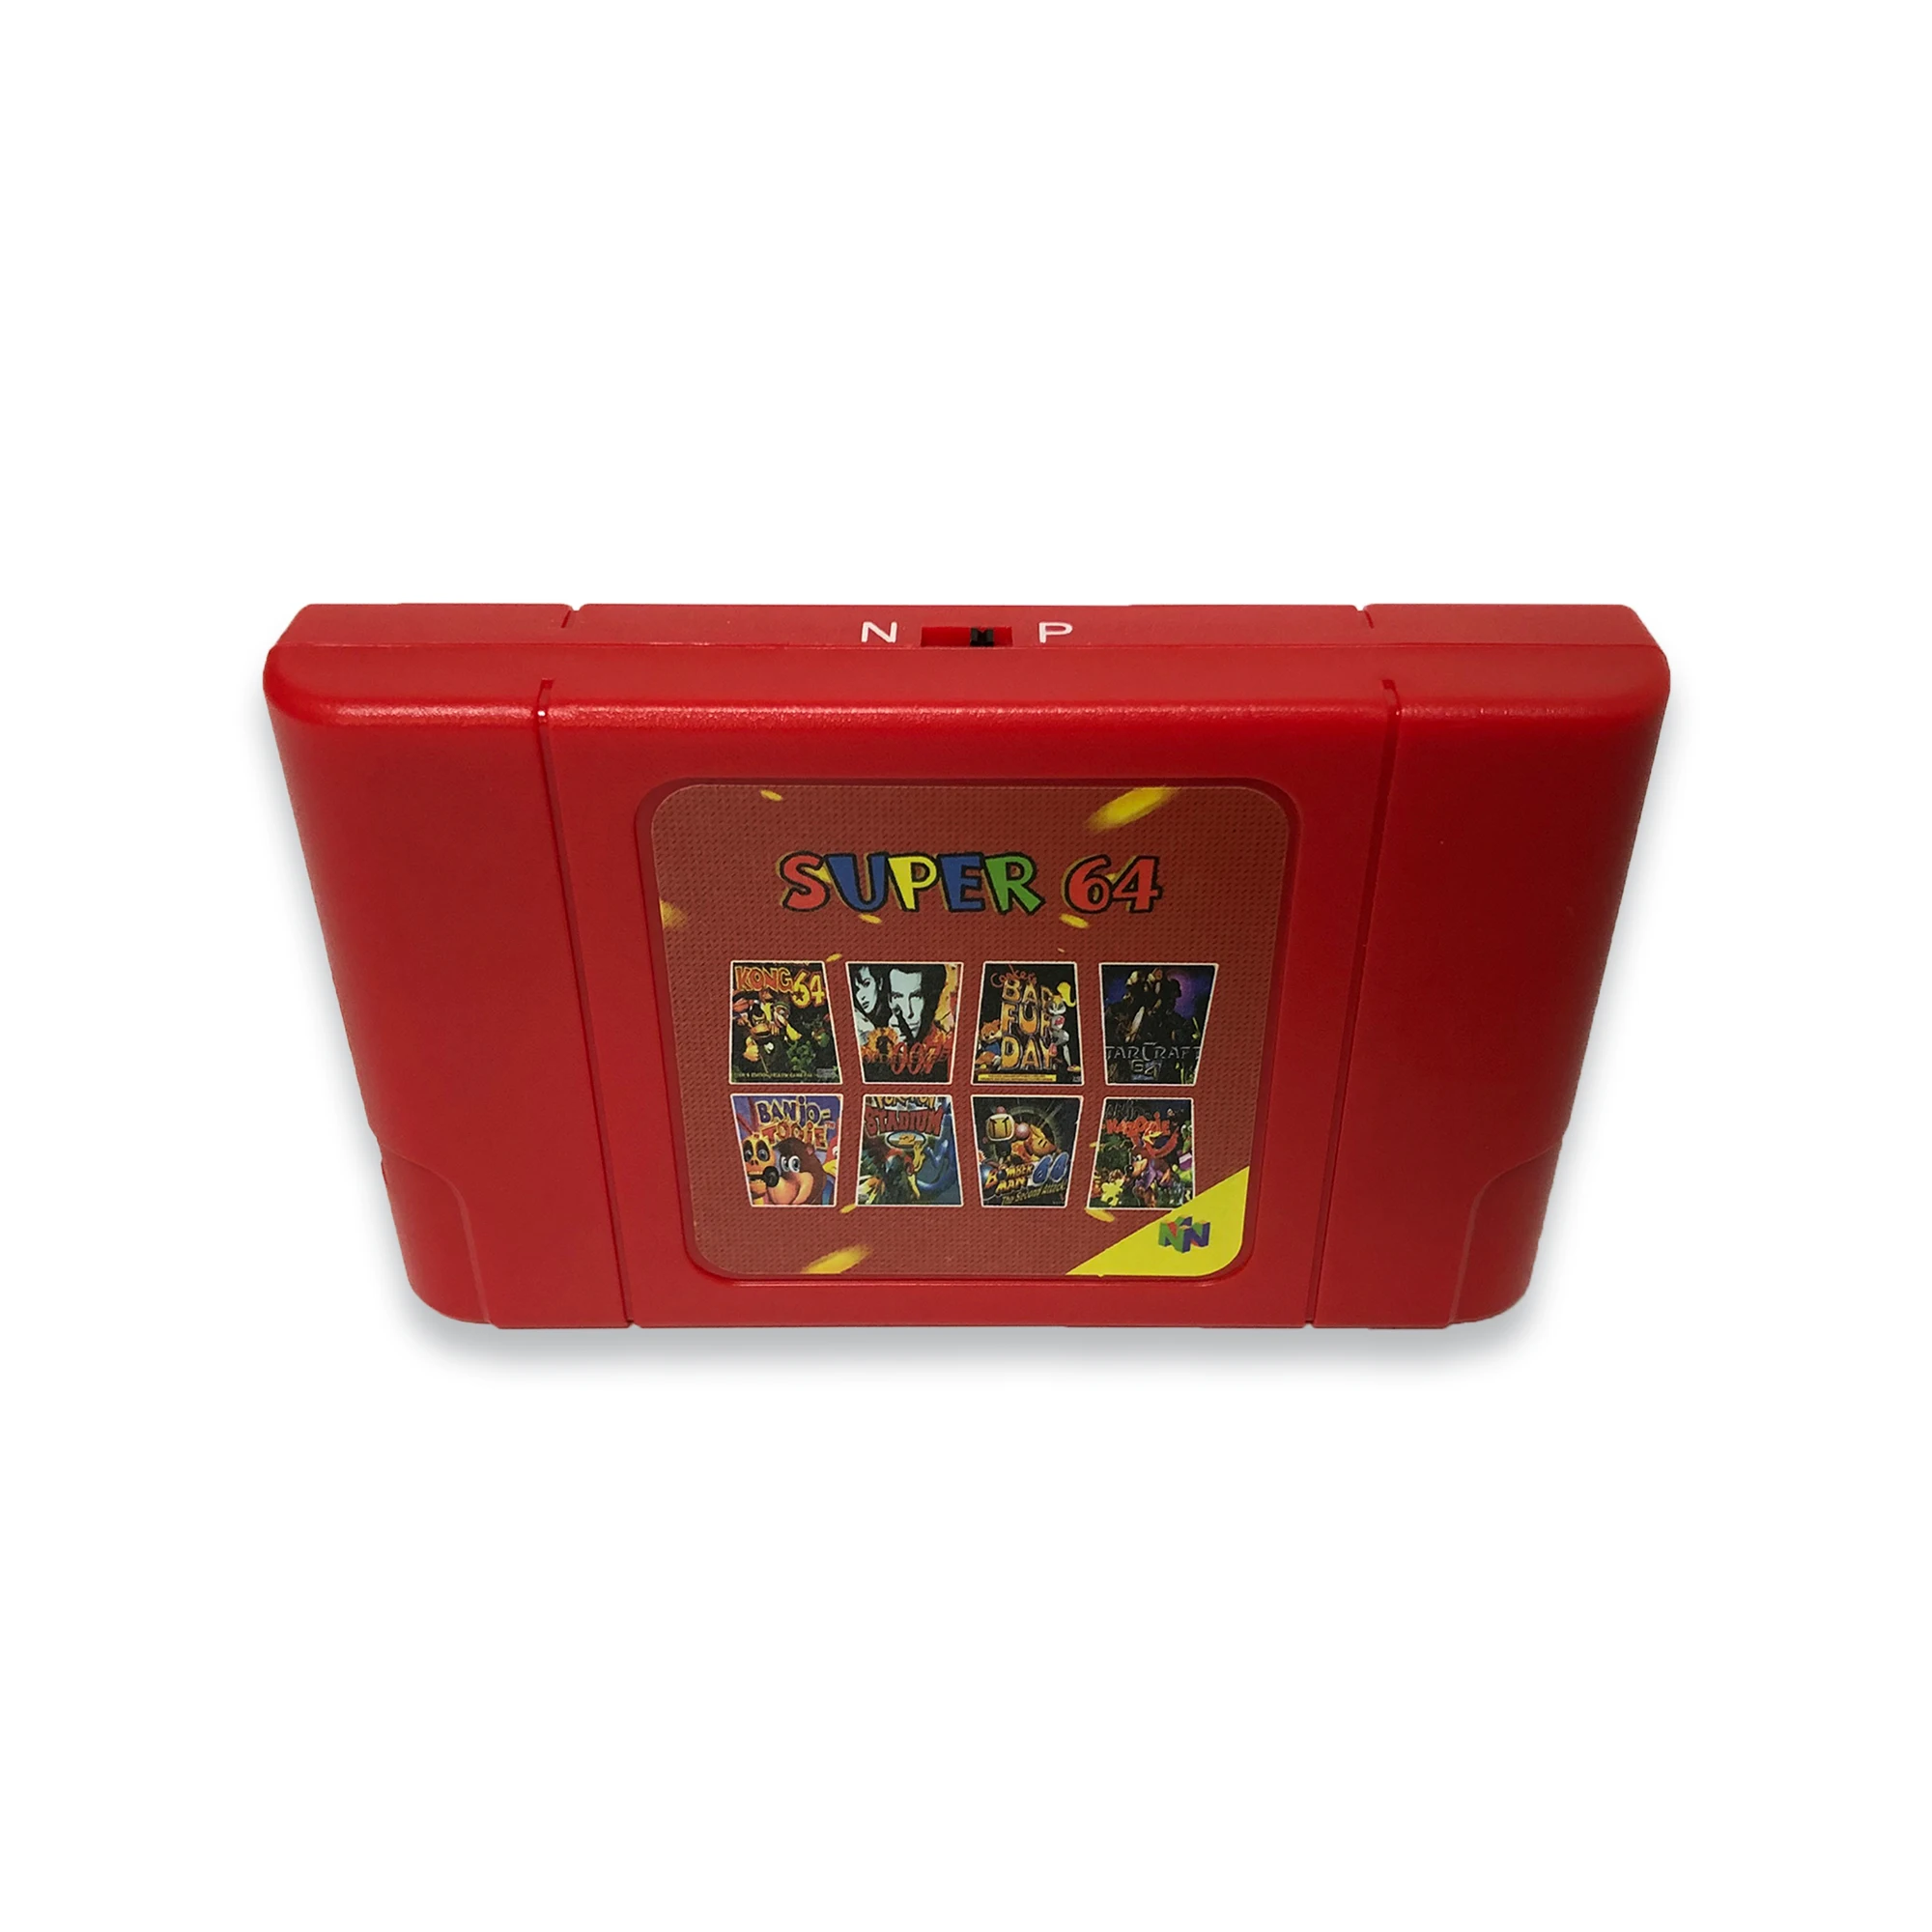 

Super 64 DIY 340 in 1 Game Cartridge for N64 Video Game Console Support NTSC & PAL System Super Mario 64 Party 1 2 3 Zelda Quest